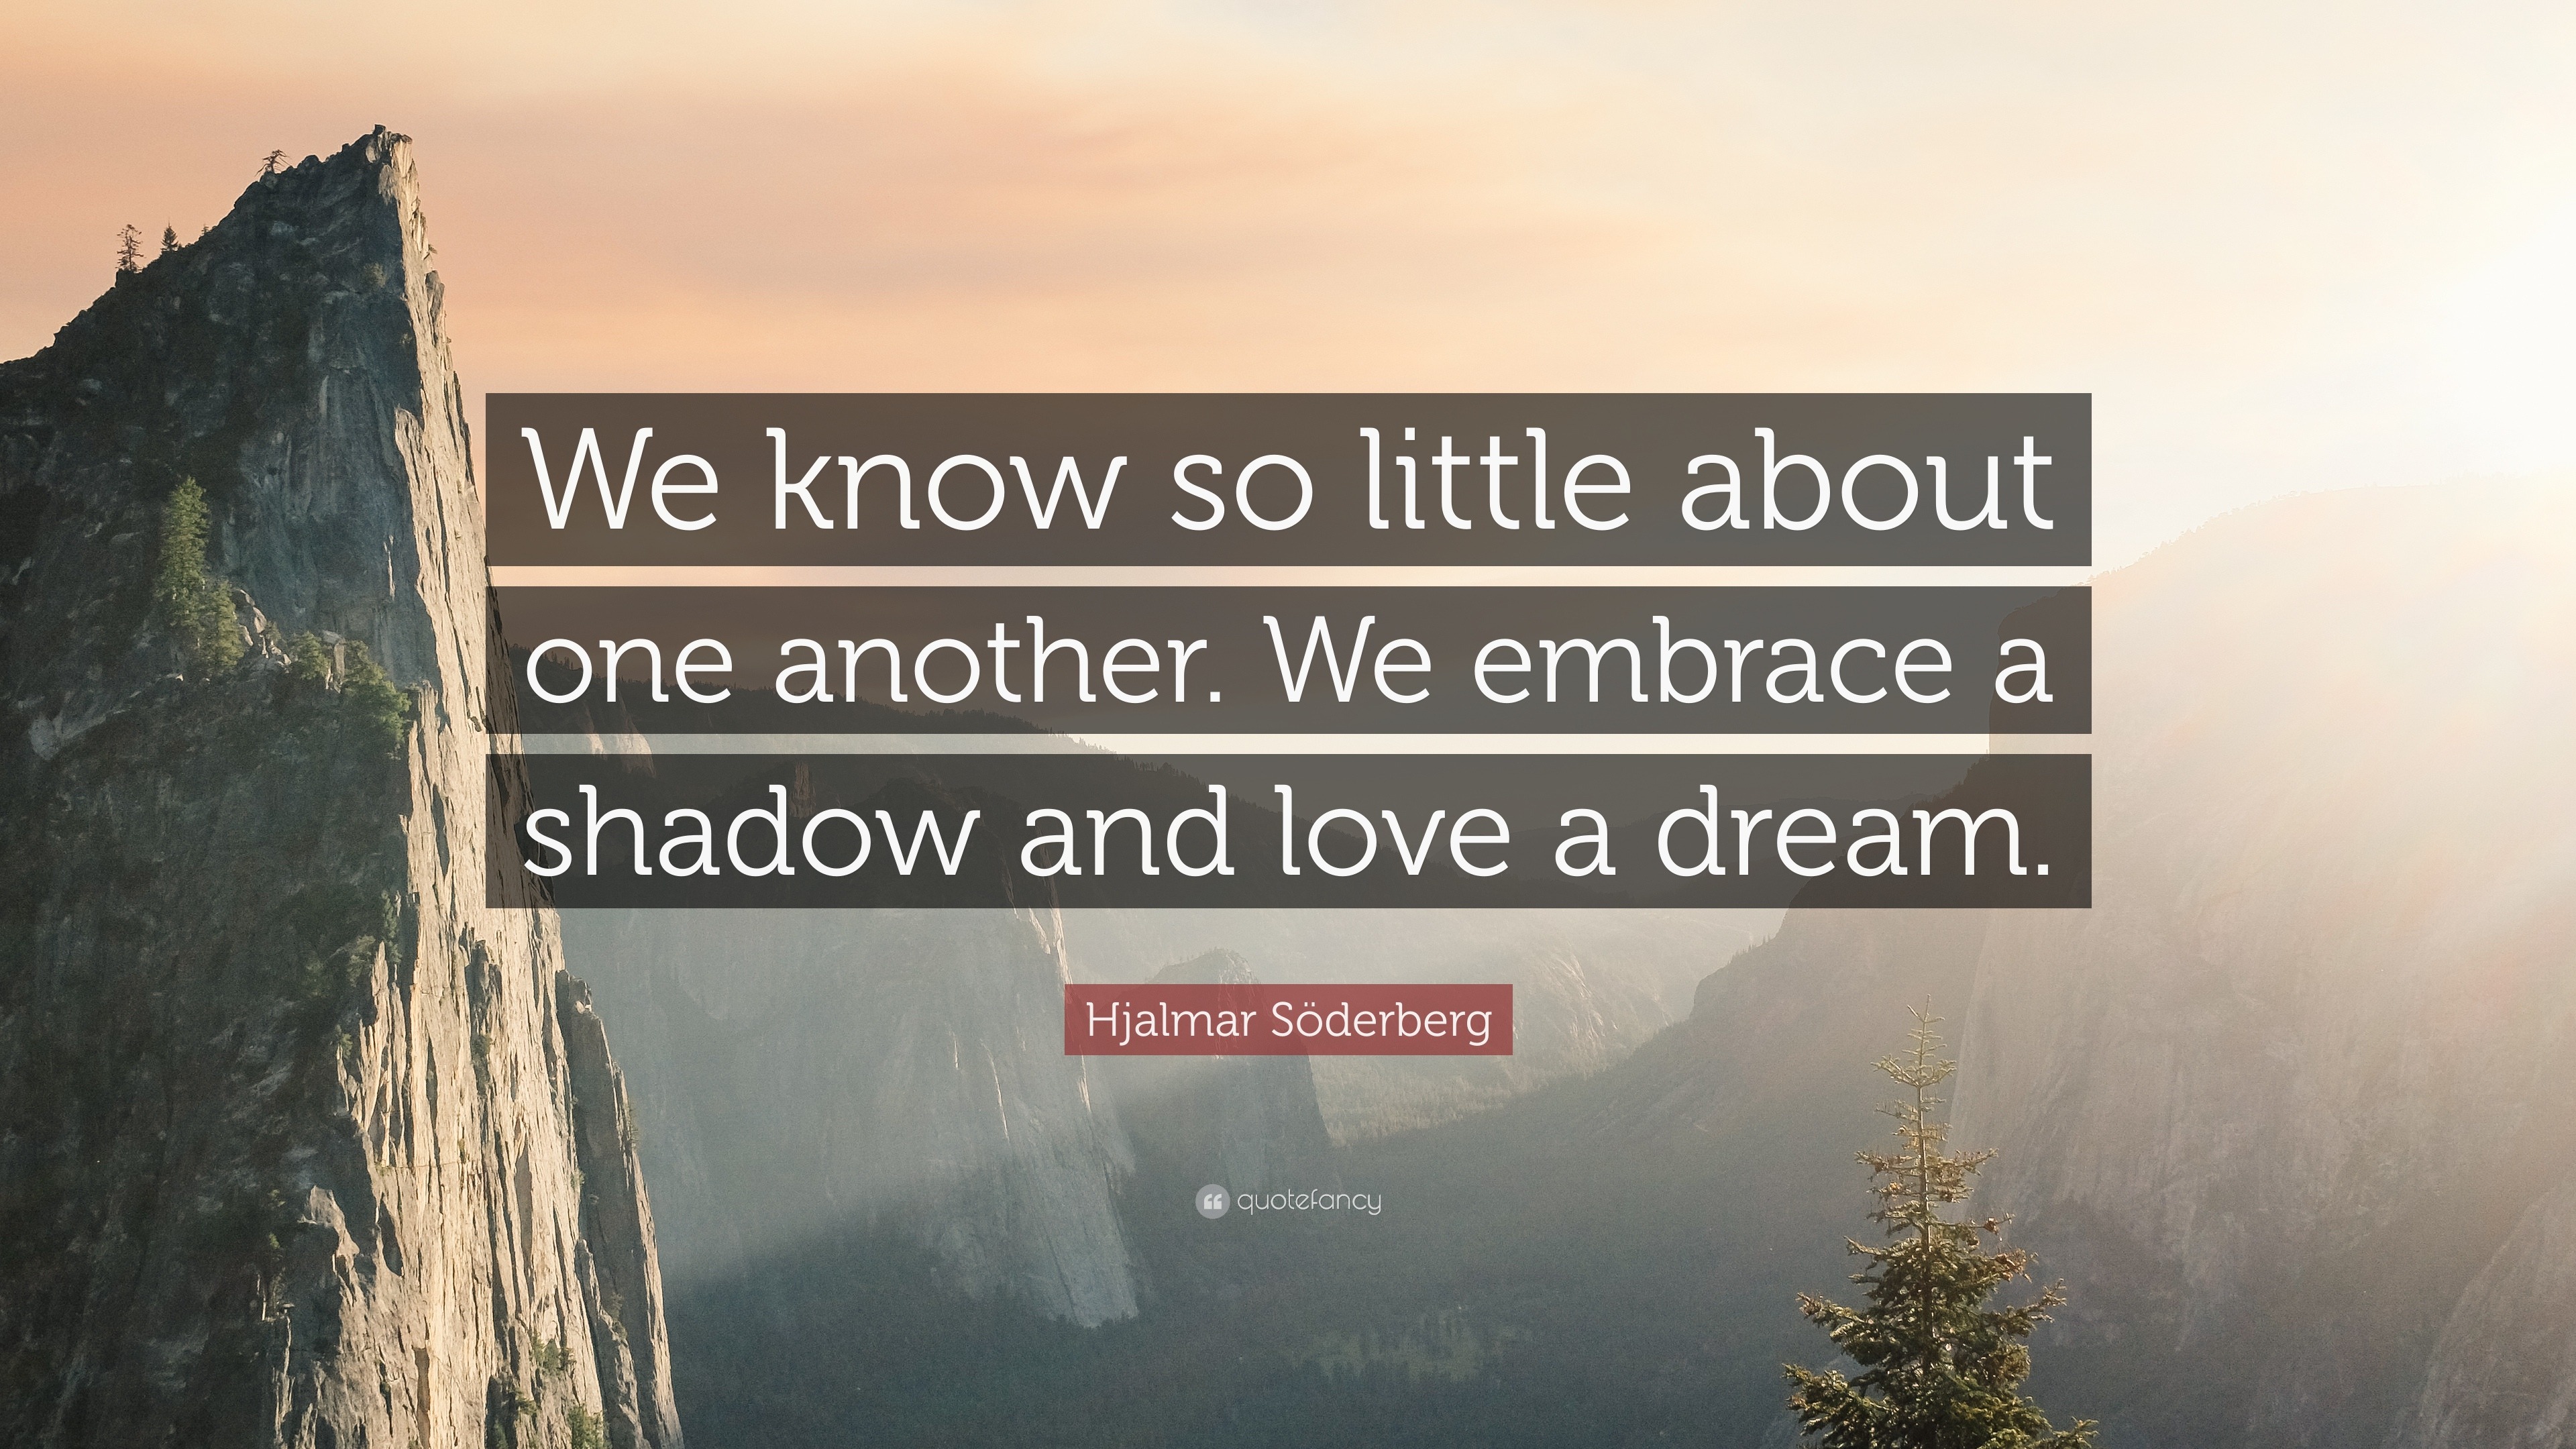 Hjalmar Söderberg Quote: “We know so little about one another. We ...